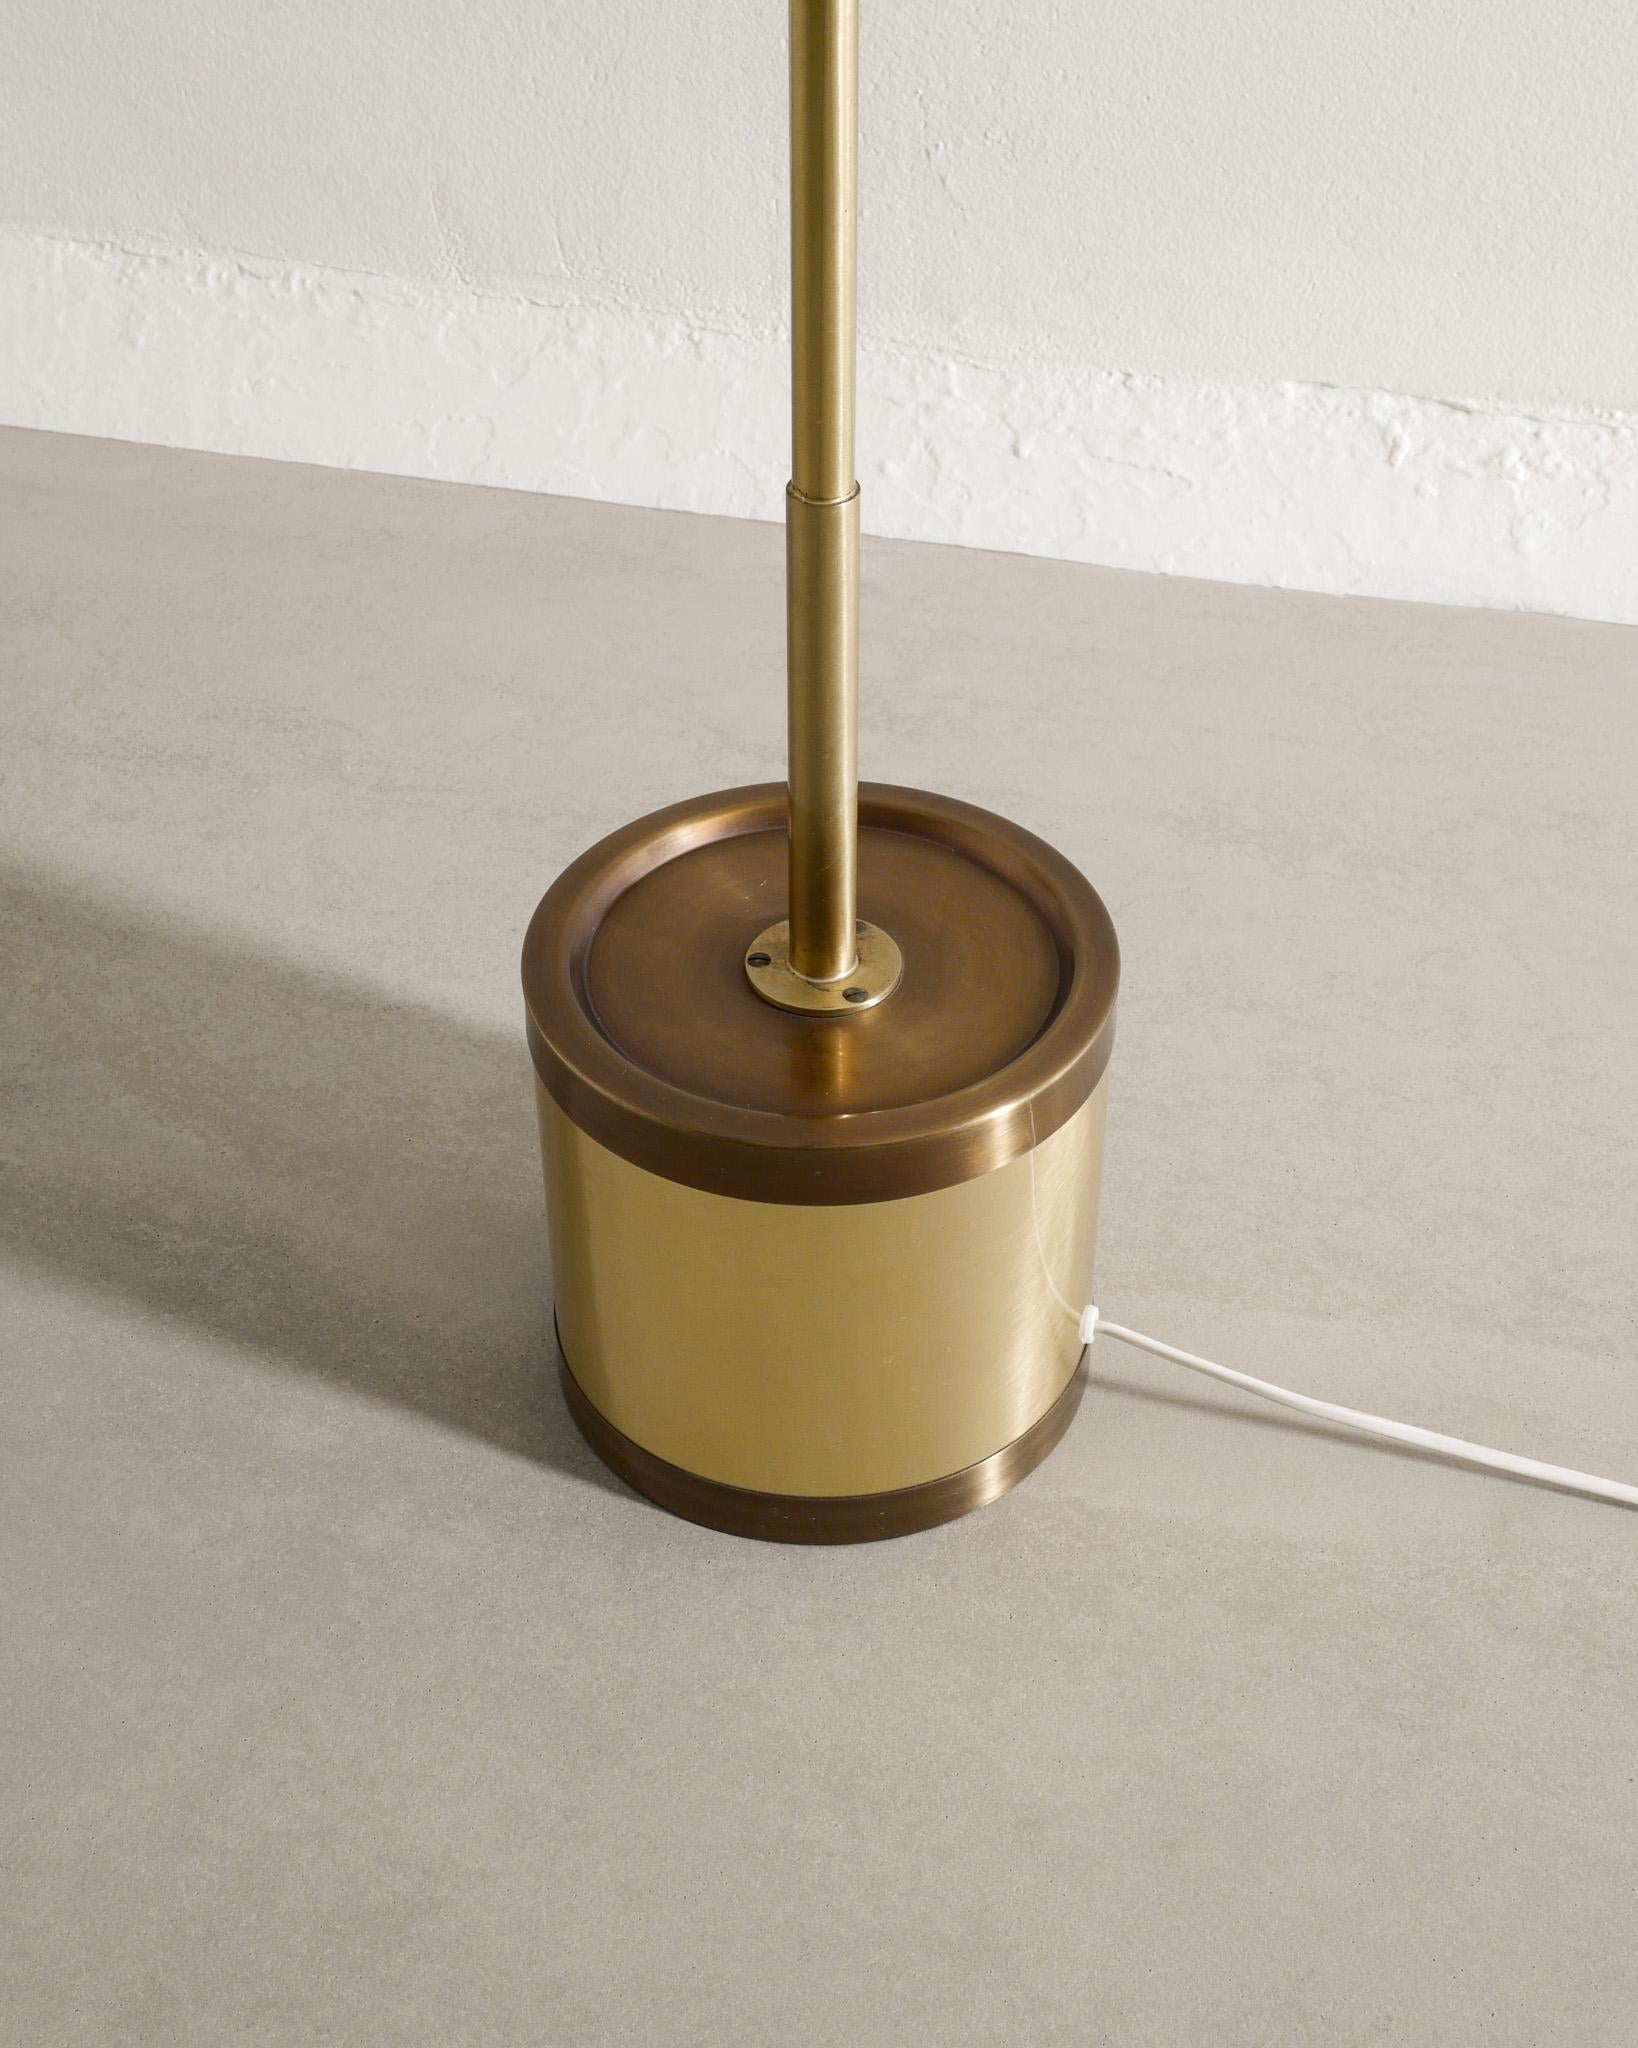 Hans-Agne Jakobsson G-123 Floor Lamp in Brass & Fabric Produced in Sweden, 1950s For Sale 4